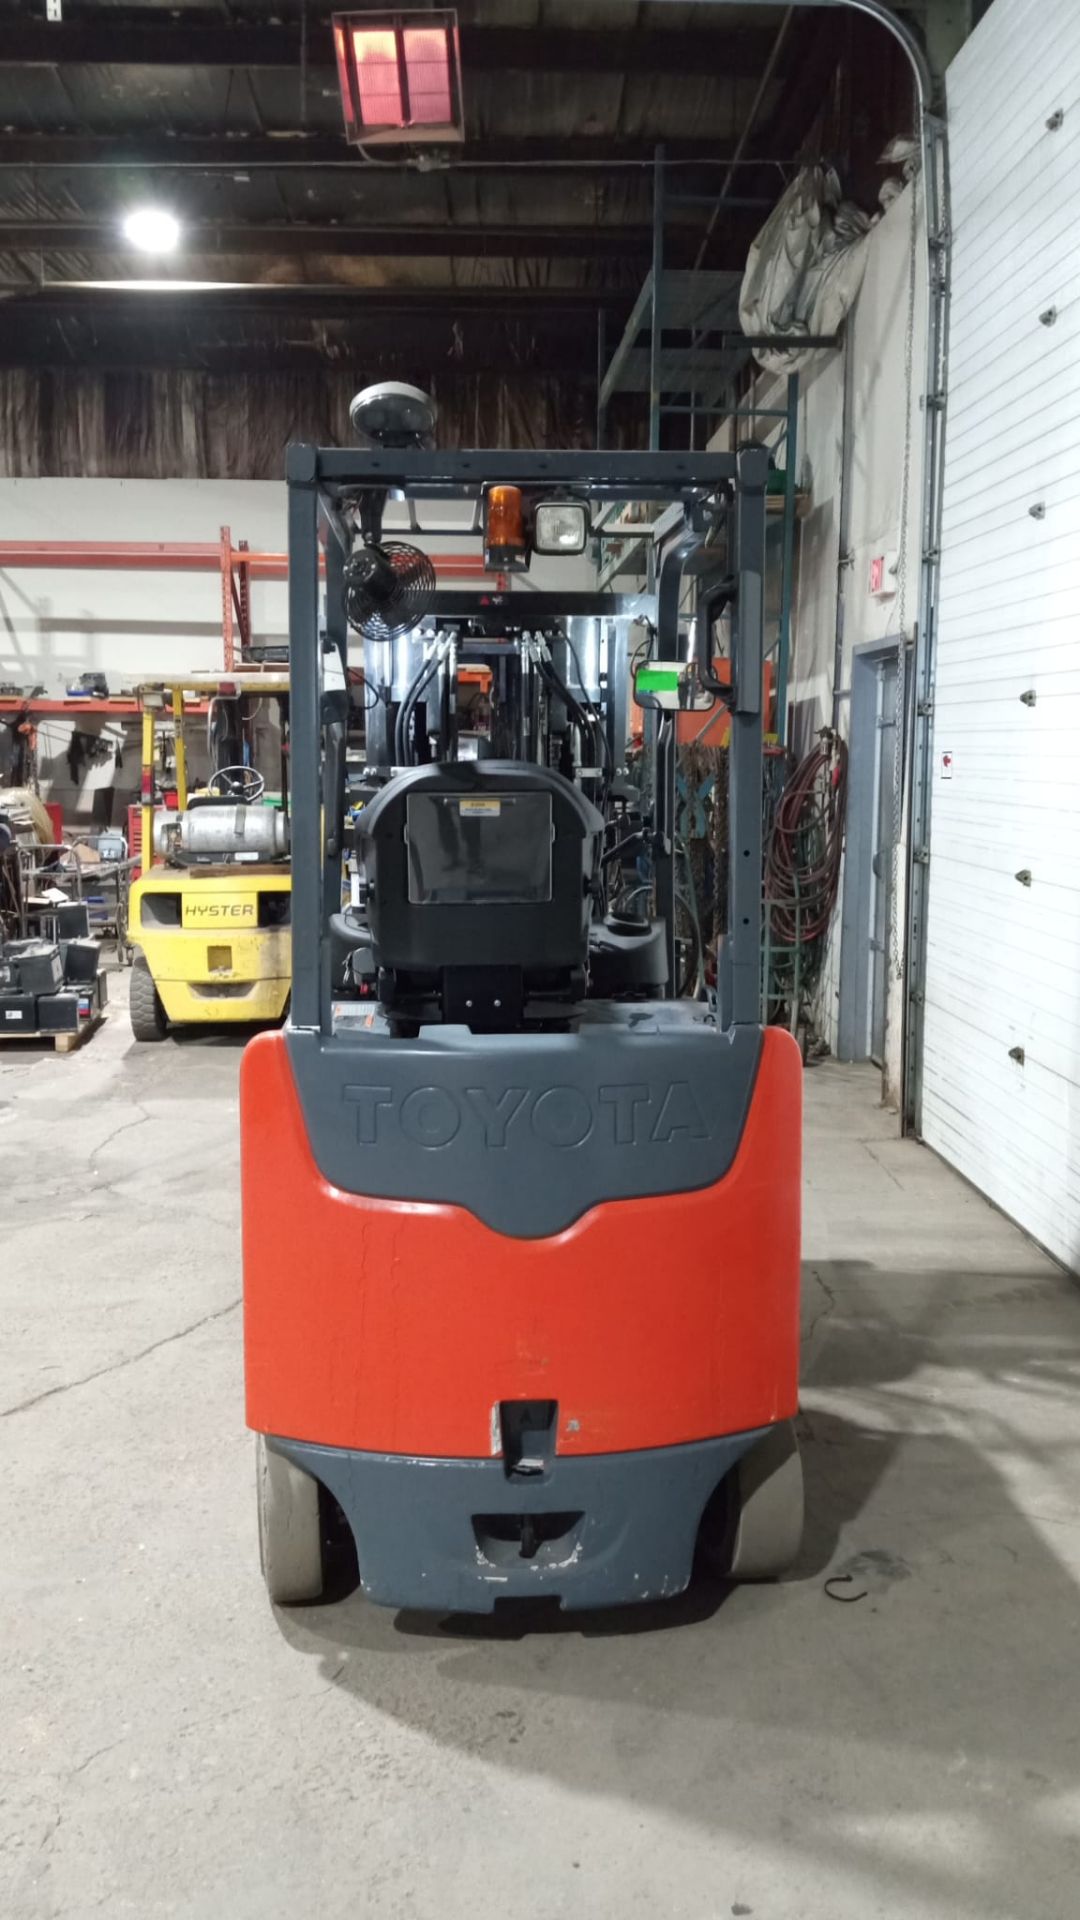 2017 TOYOTA 5,000lbs Capacity Electric Forklift 4-Stage Mast 48V with sideshift & Fork Positioner - Image 6 of 6